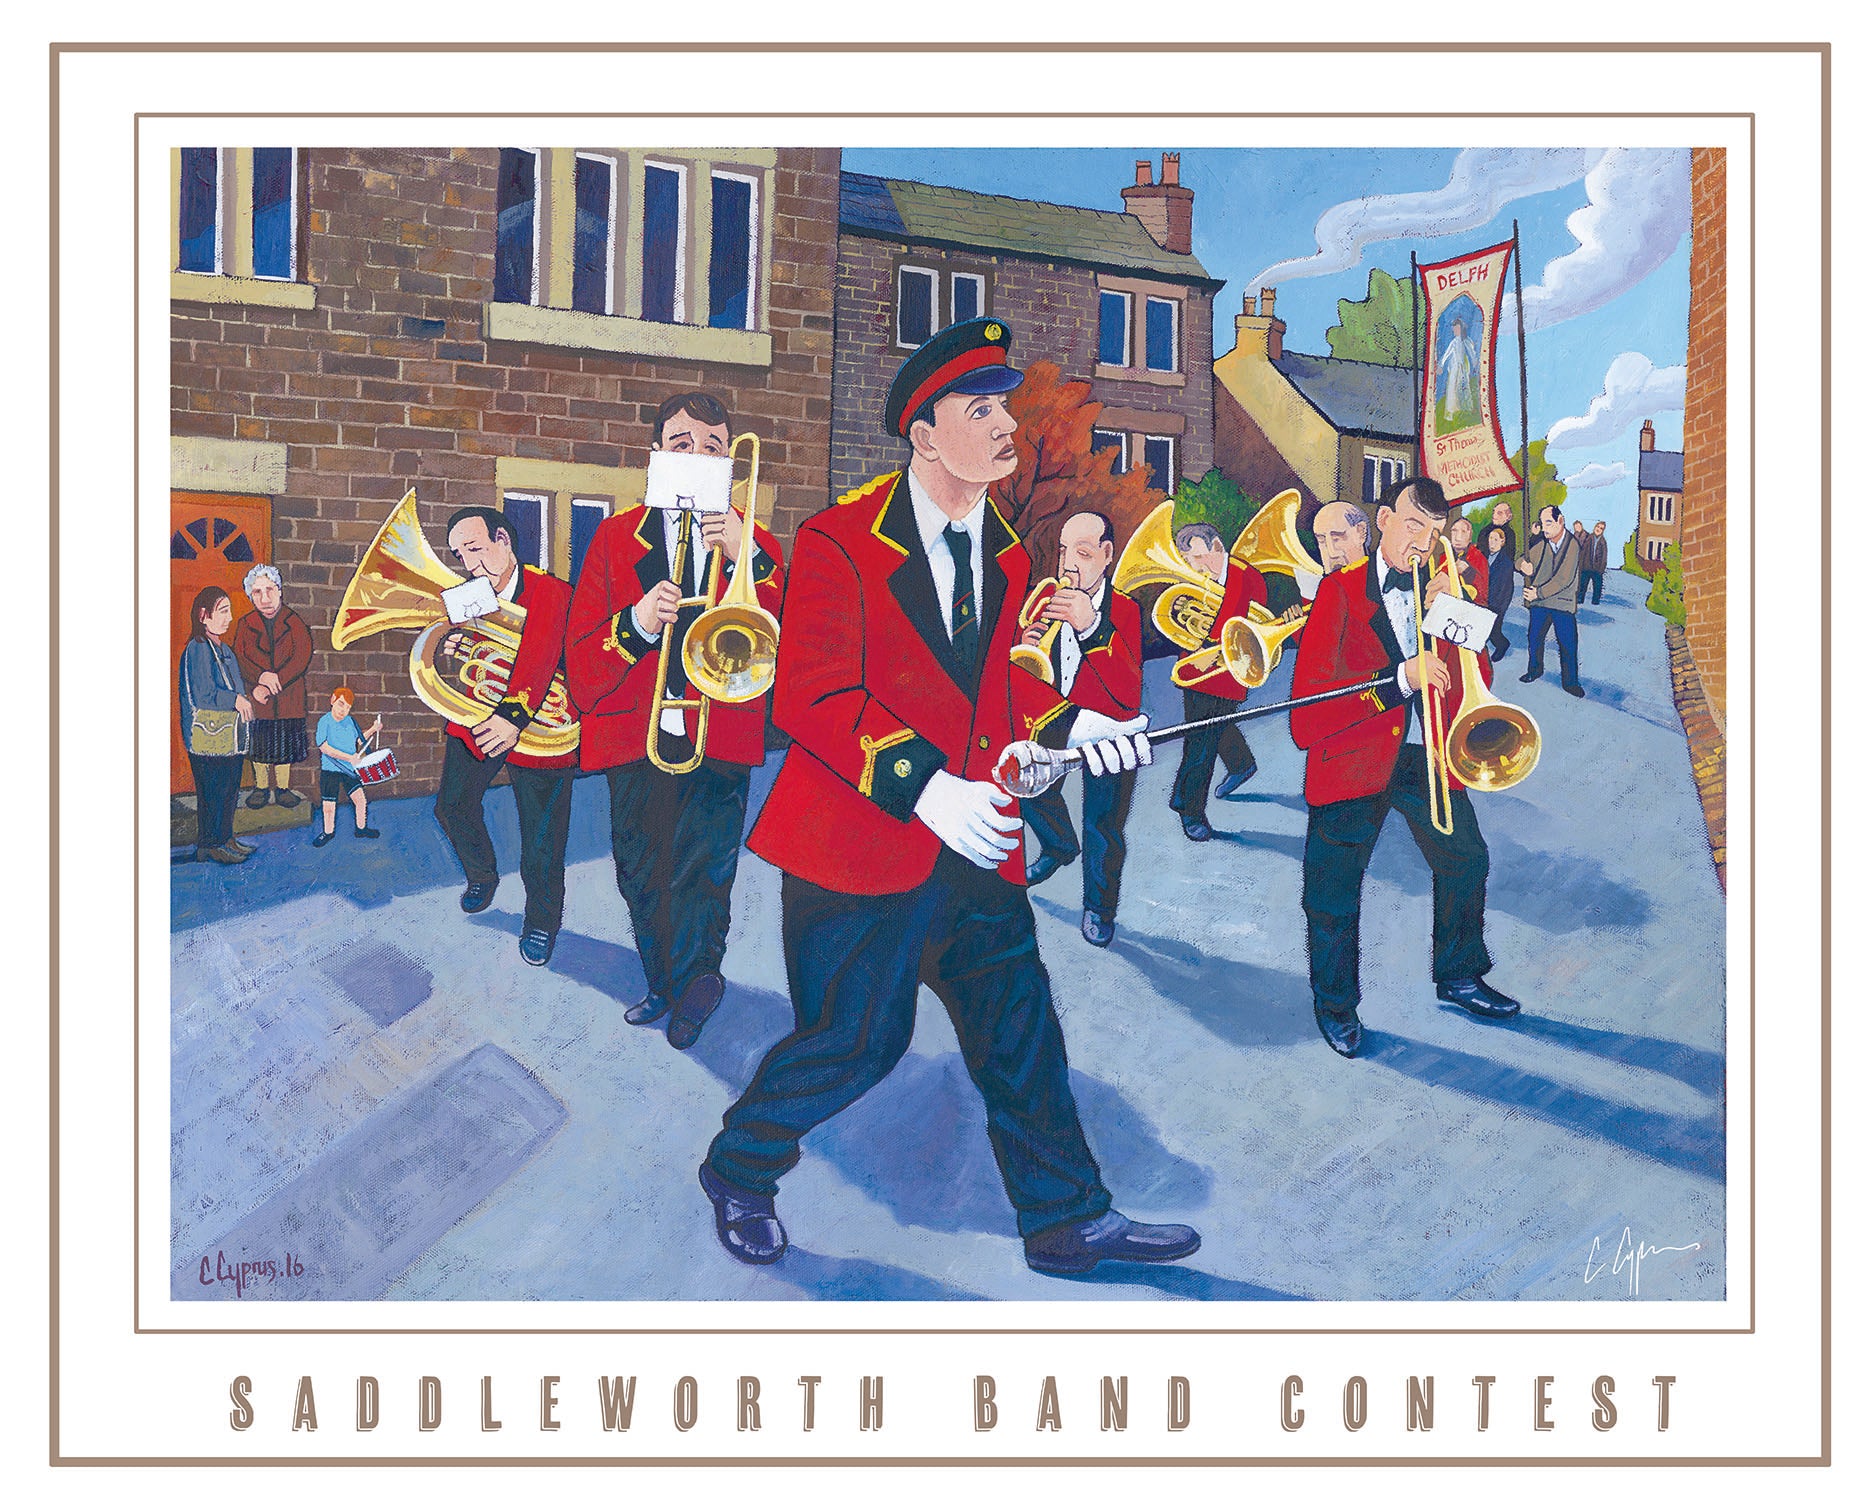  A parade of brass at the famous Whit Friday celebrations in saddleworth, Oldham.  Reproduced from my original painting 'the reds go marching' 2016          A2 size         Printed on 250gsm silk board paper - sustainably sourced         Tube rolled ideal for worldwide shipping